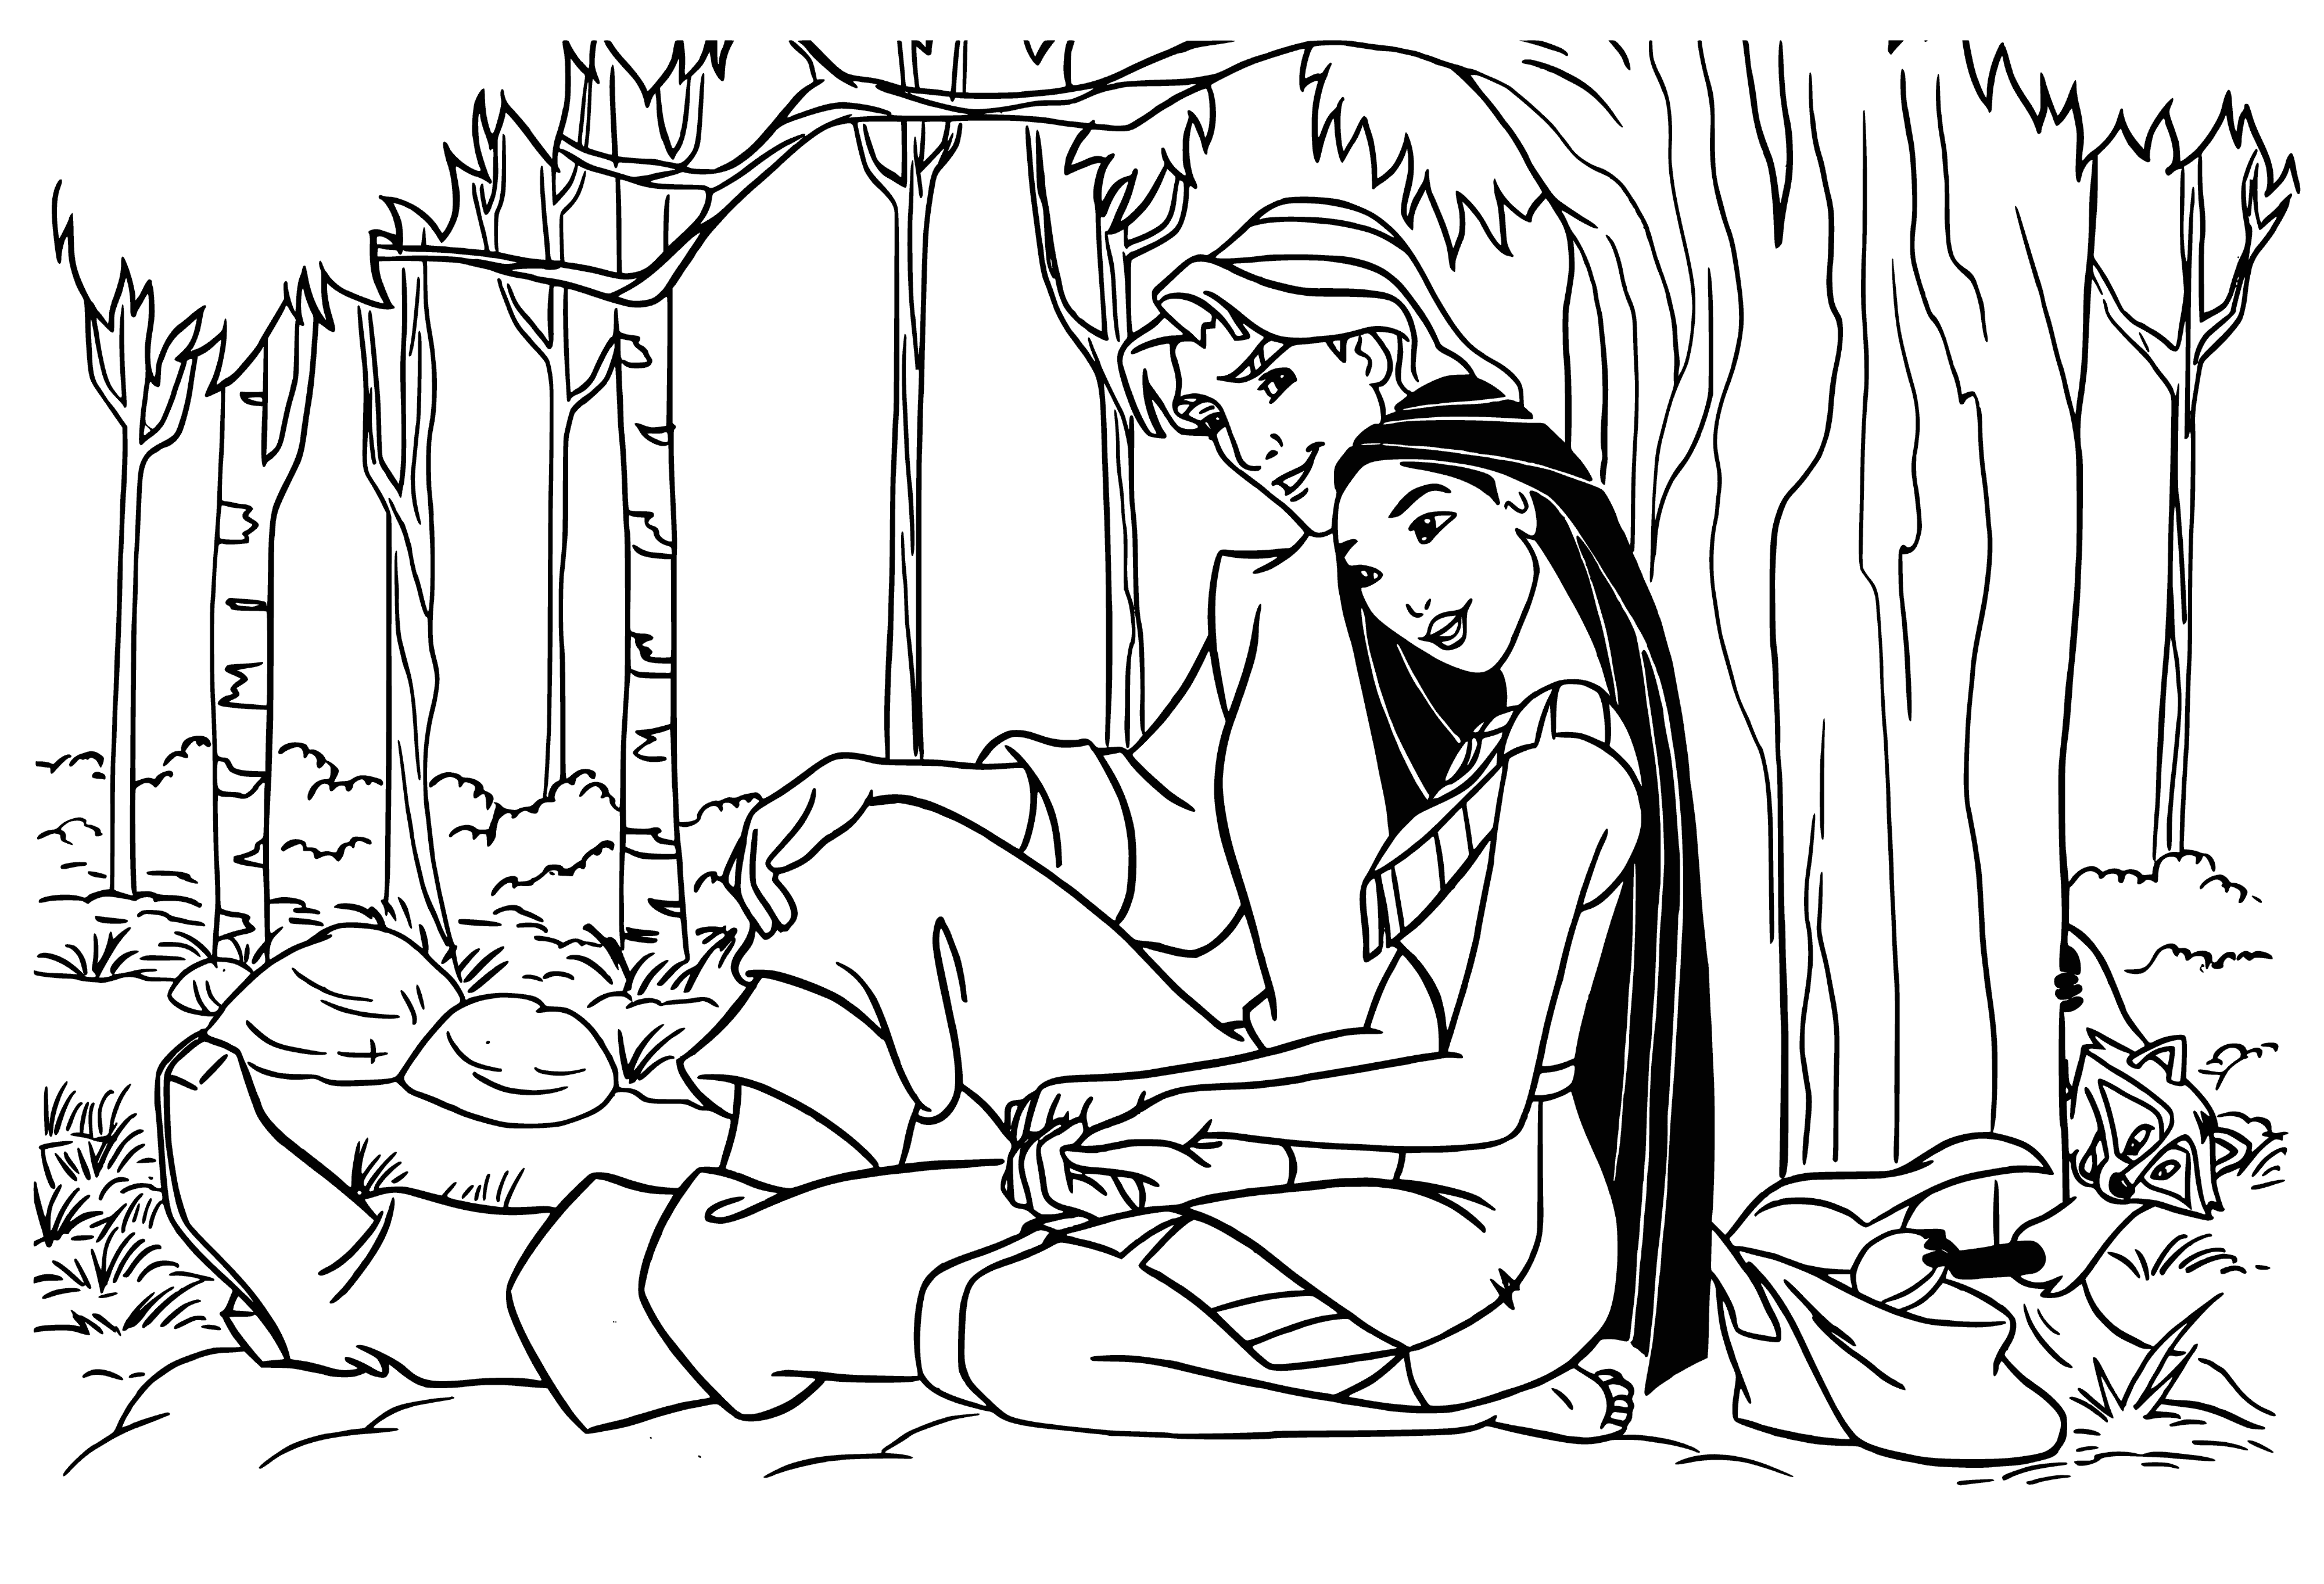 coloring page: Loving pair in embrace, looking into each other's eyes. #Love   

Loving embrace: A woman in a dress and man in armor stare into each other's eyes. #Love